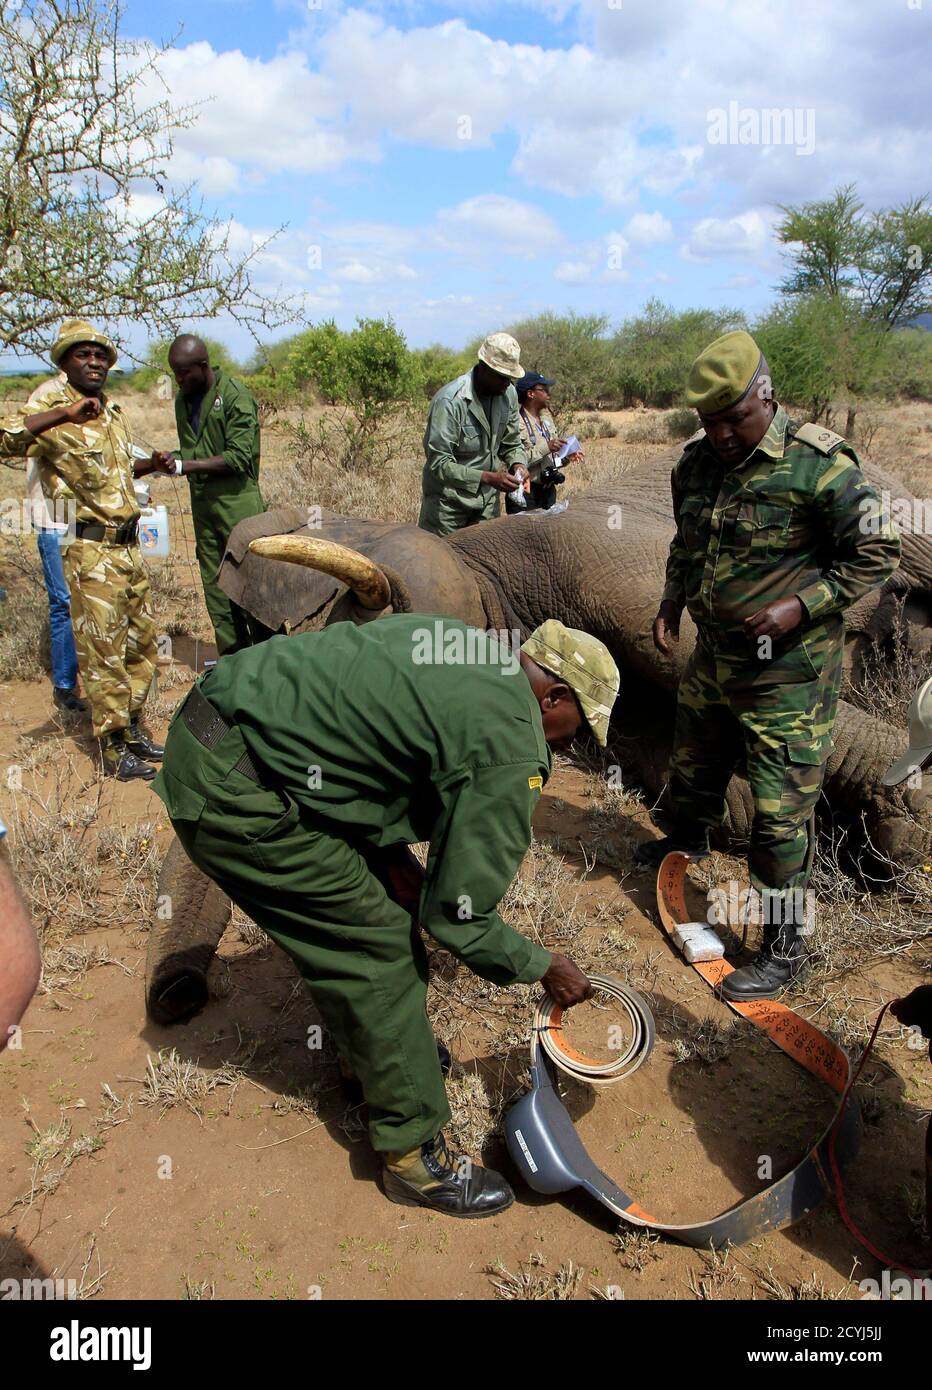 Kenya Wildlife Services (KWS) personnel prepares to fit an electronic data collar on an immobilized male elephant  south of Kajiado 120km (75 Miles) south of capital Nairobi, December 3, 2013. The wildlife body is collaring elephants along the Amboseli ecosystem to monitor movement patterns of the animals due to shrinking land availability with the ever increasing human settlement. REUTERS/Noor Khamis (KENYA - Tags: ENVIRONMENT SOCIETY SCIENCE TECHNOLOGY) Stock Photo